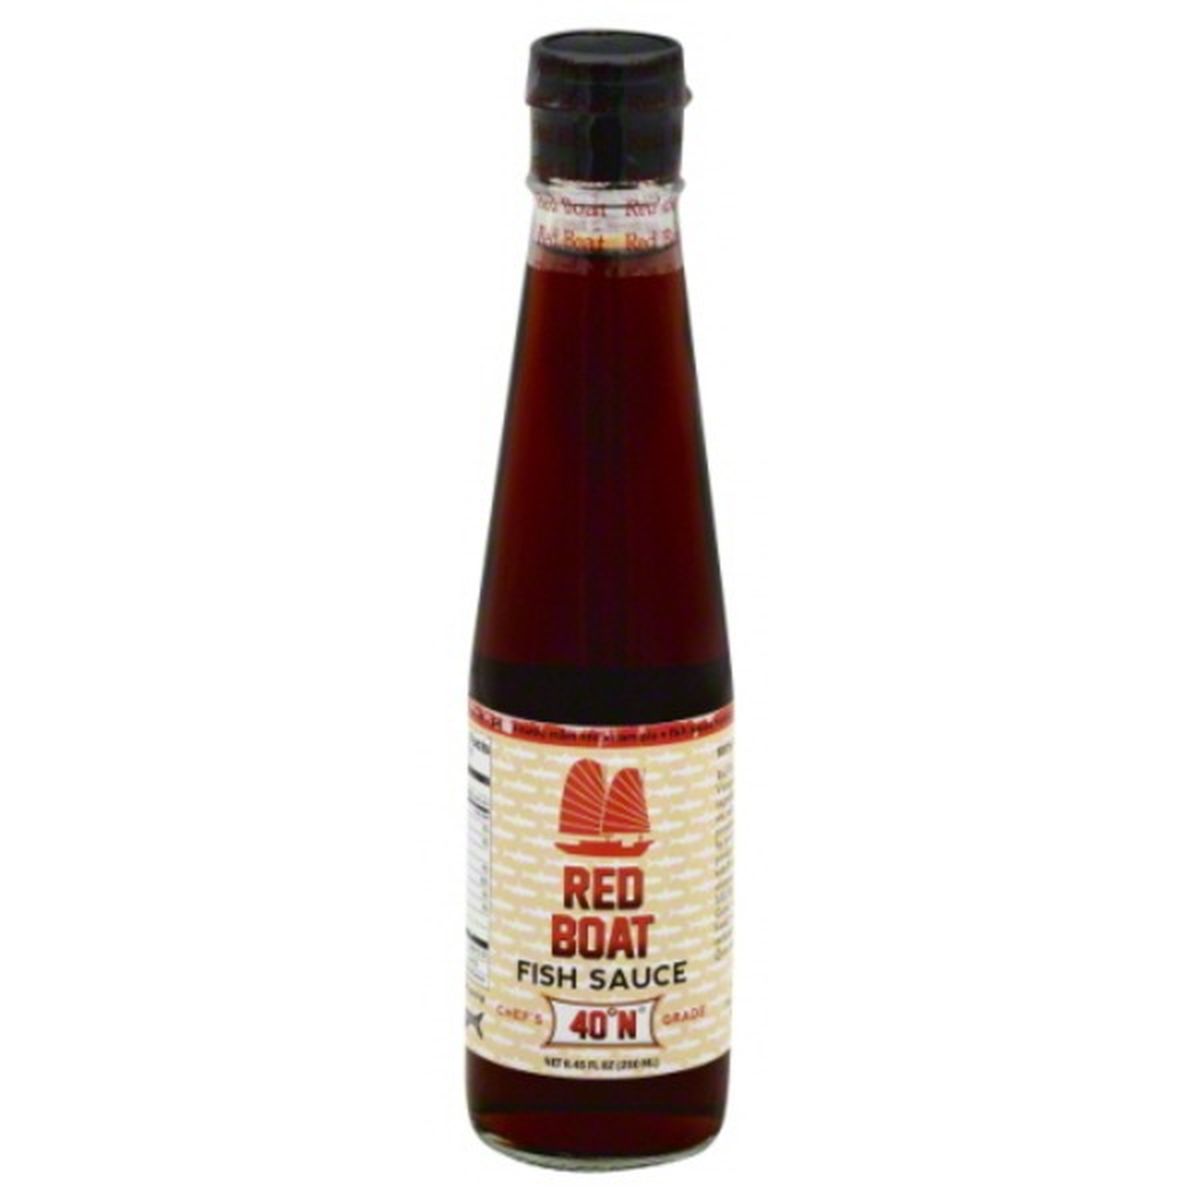 Calories in Red Boat Fish Sauce